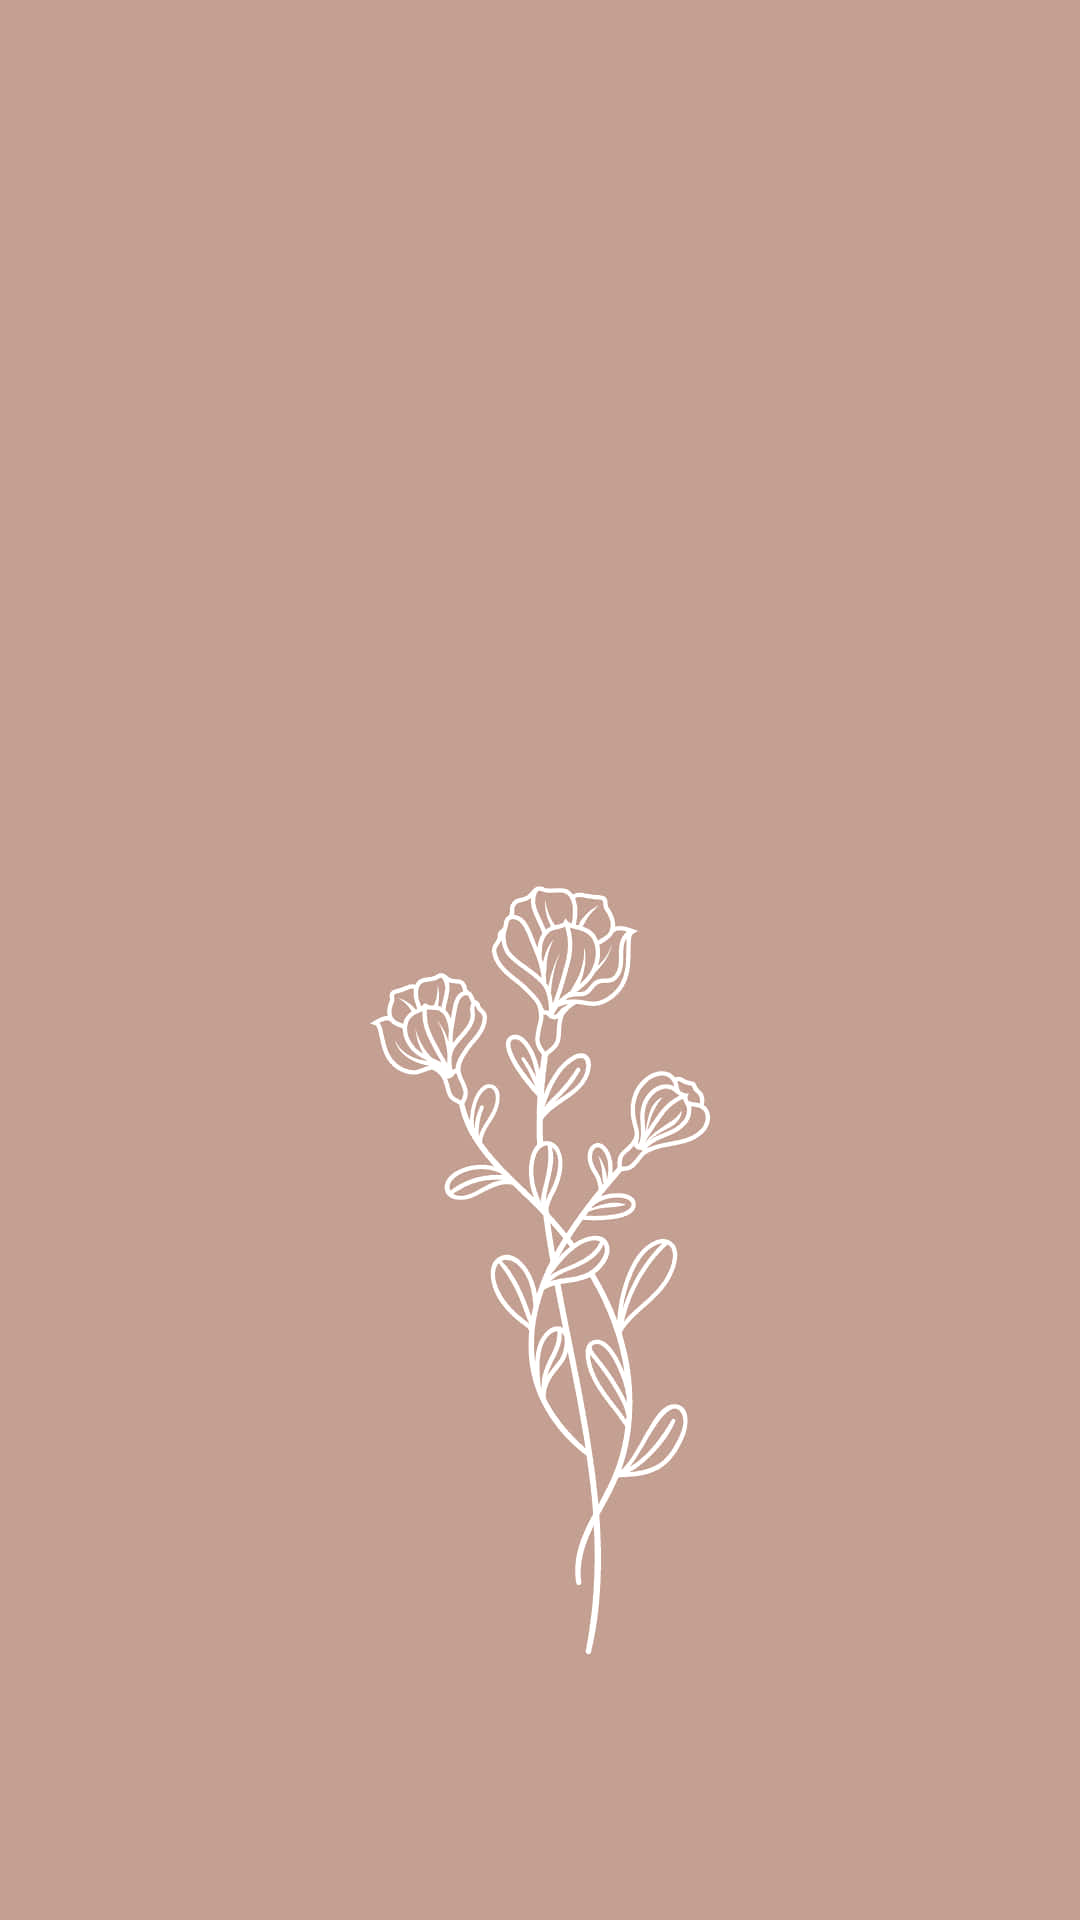 A White Flower On A Beige Background Wallpaper